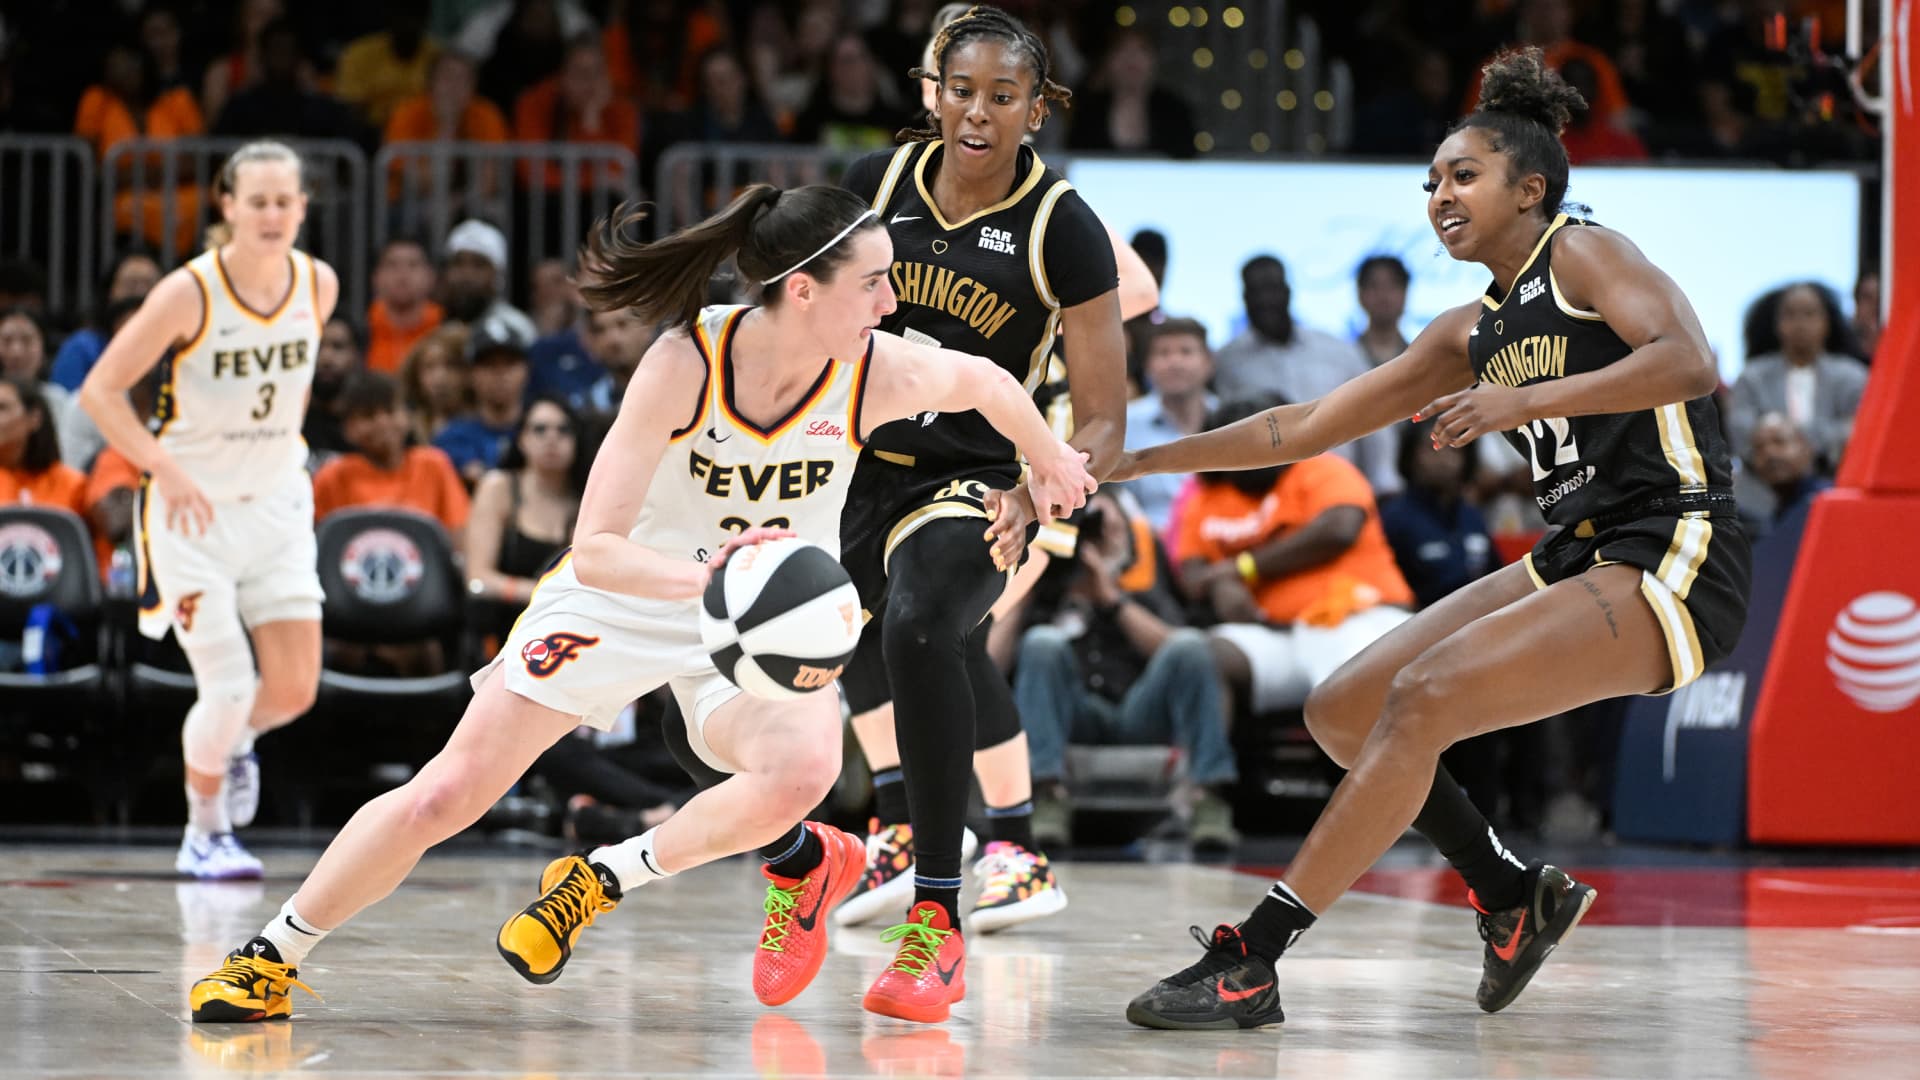 WNBA reports record TV viewership and highest game attendance in 26 years